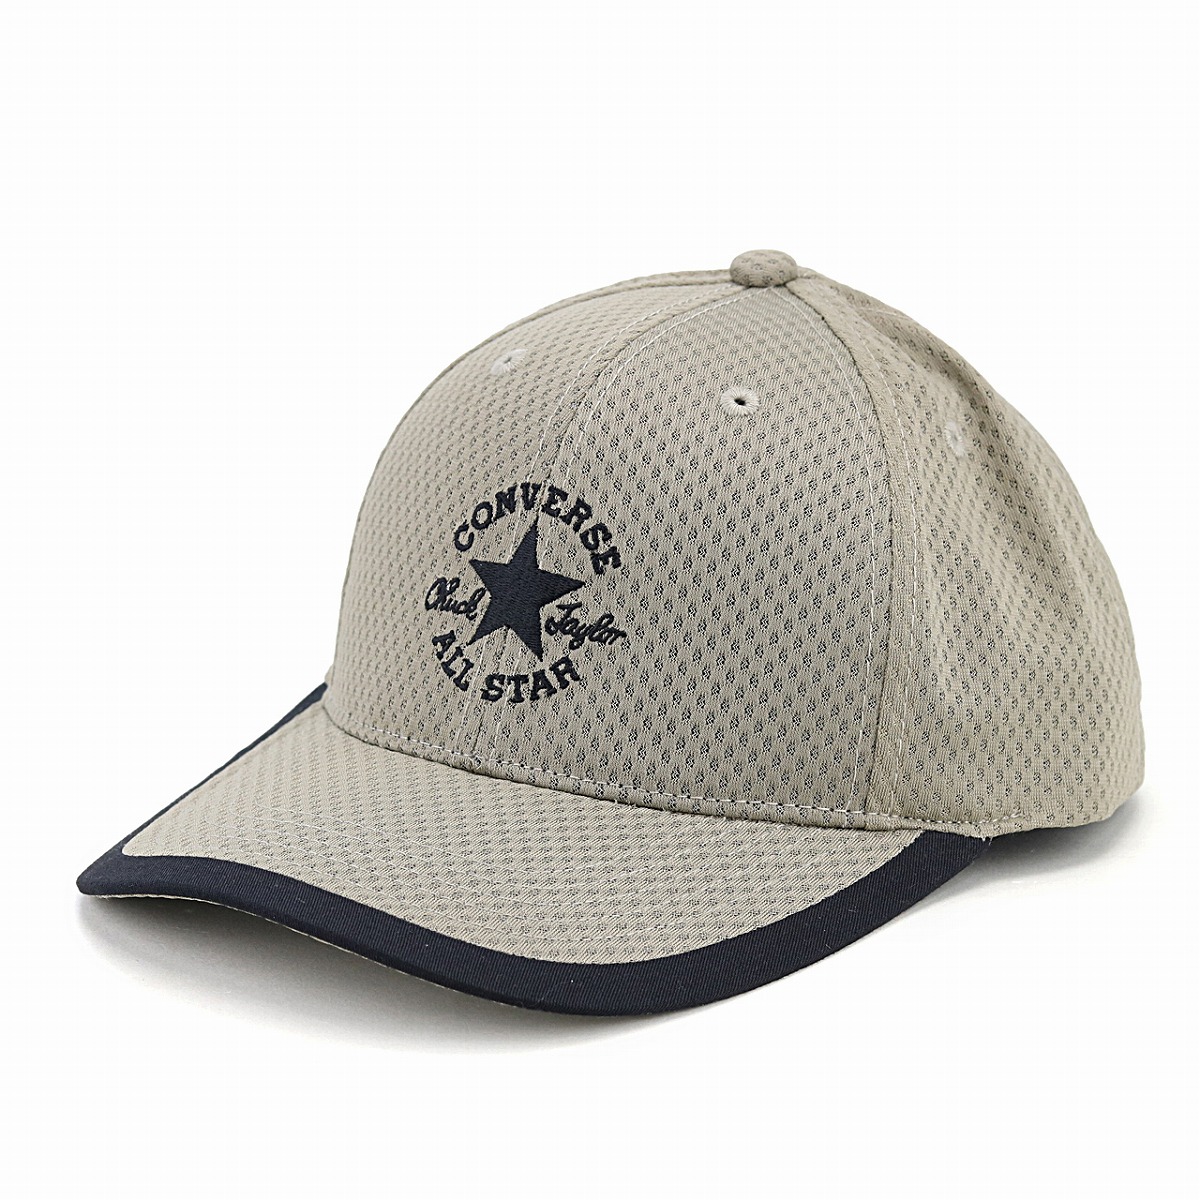 converse all star hat